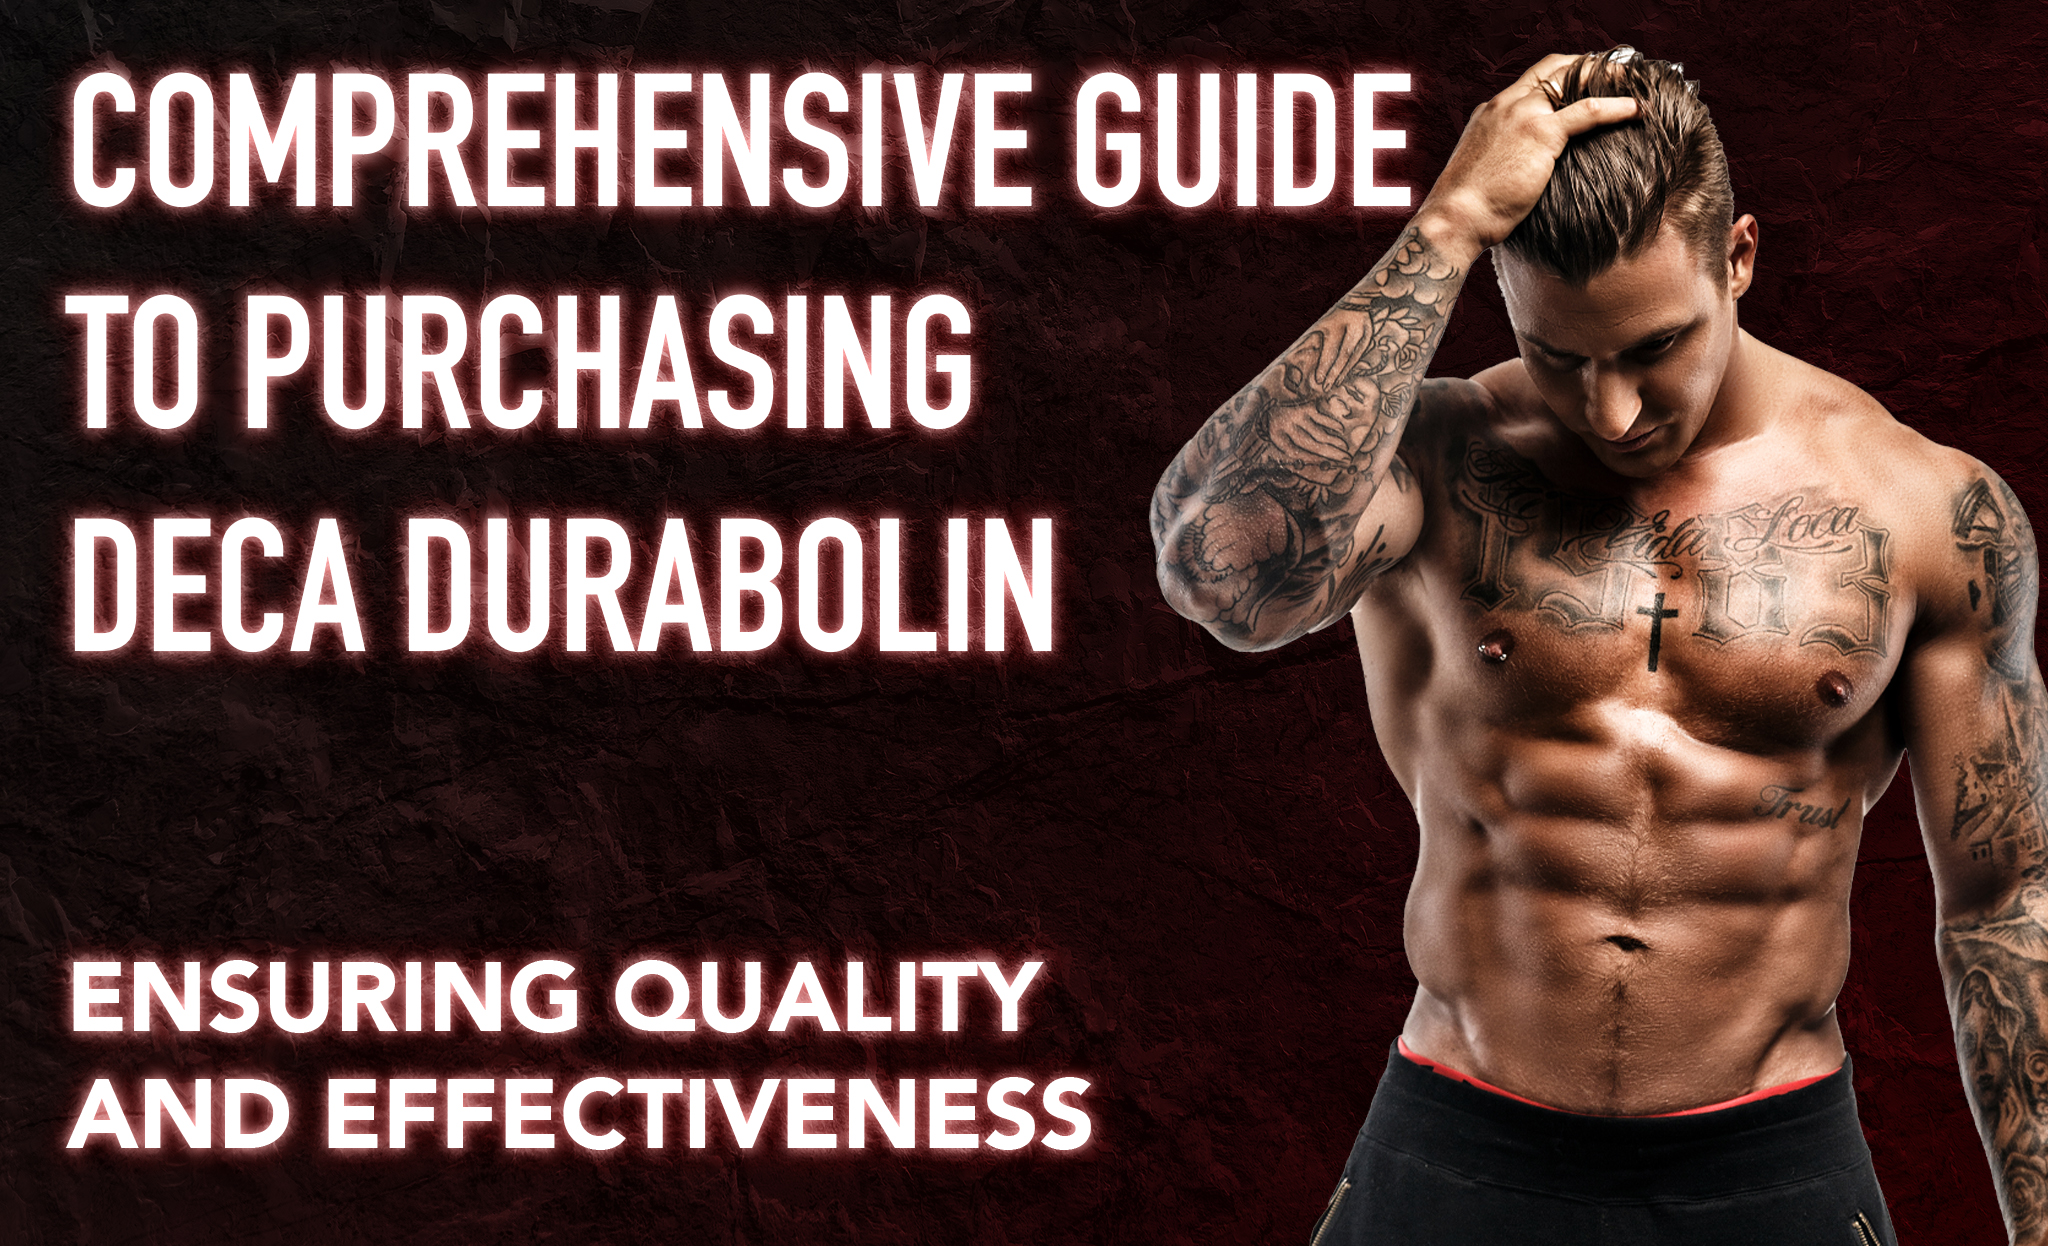 Comprehensive Guide to Purchasing Deca Durabolin: Ensuring Quality and Effectiveness